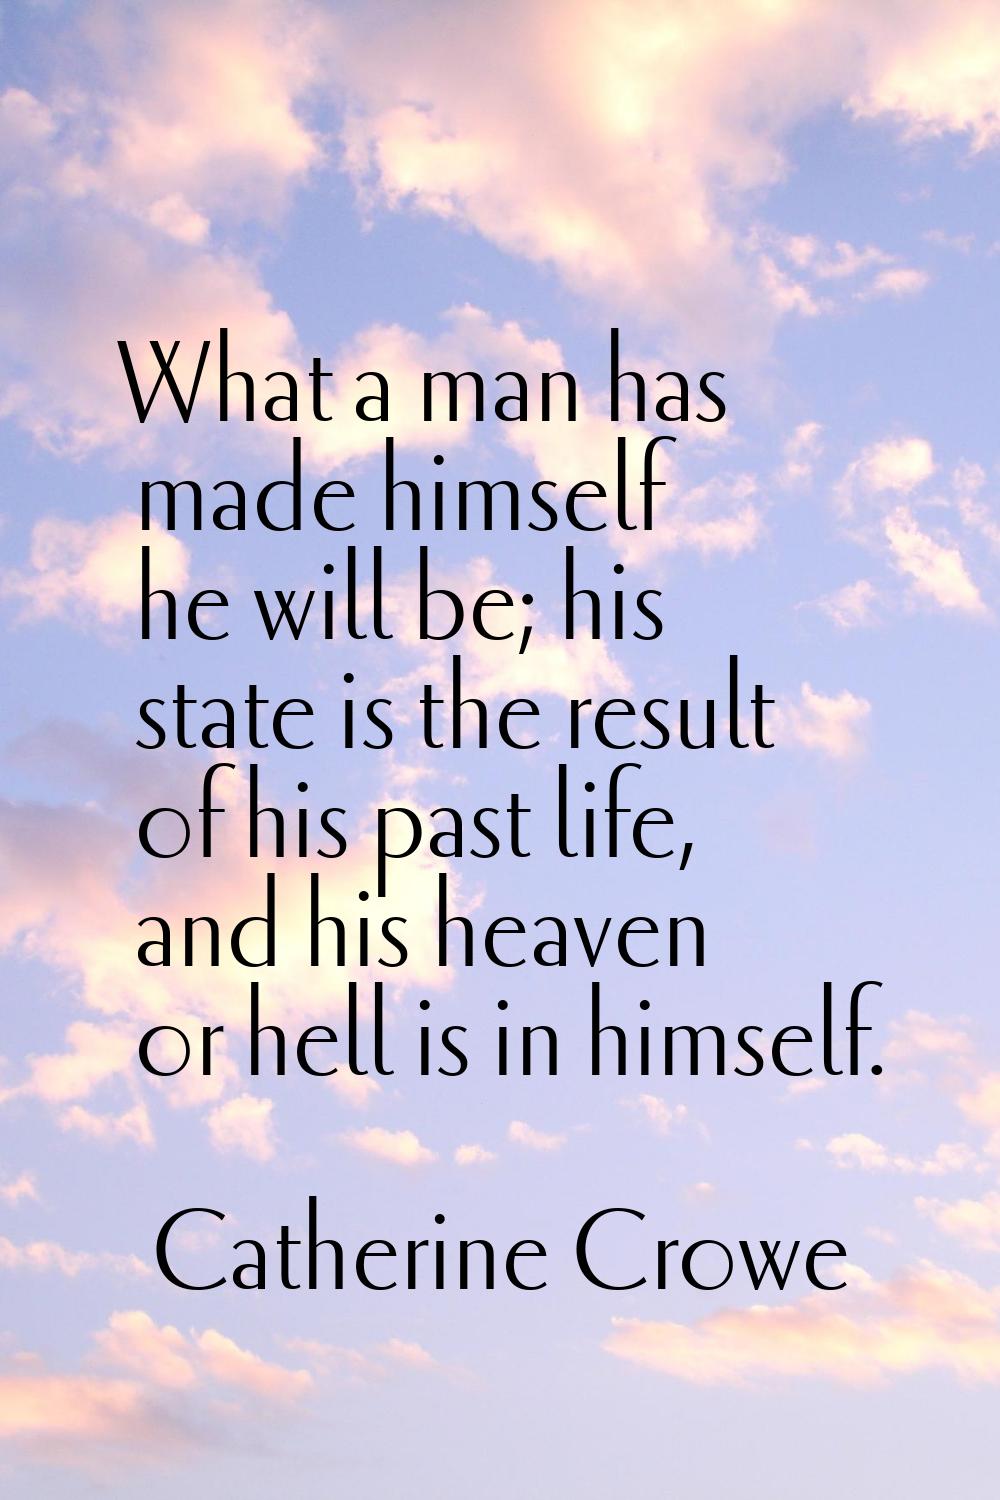 What a man has made himself he will be; his state is the result of his past life, and his heaven or